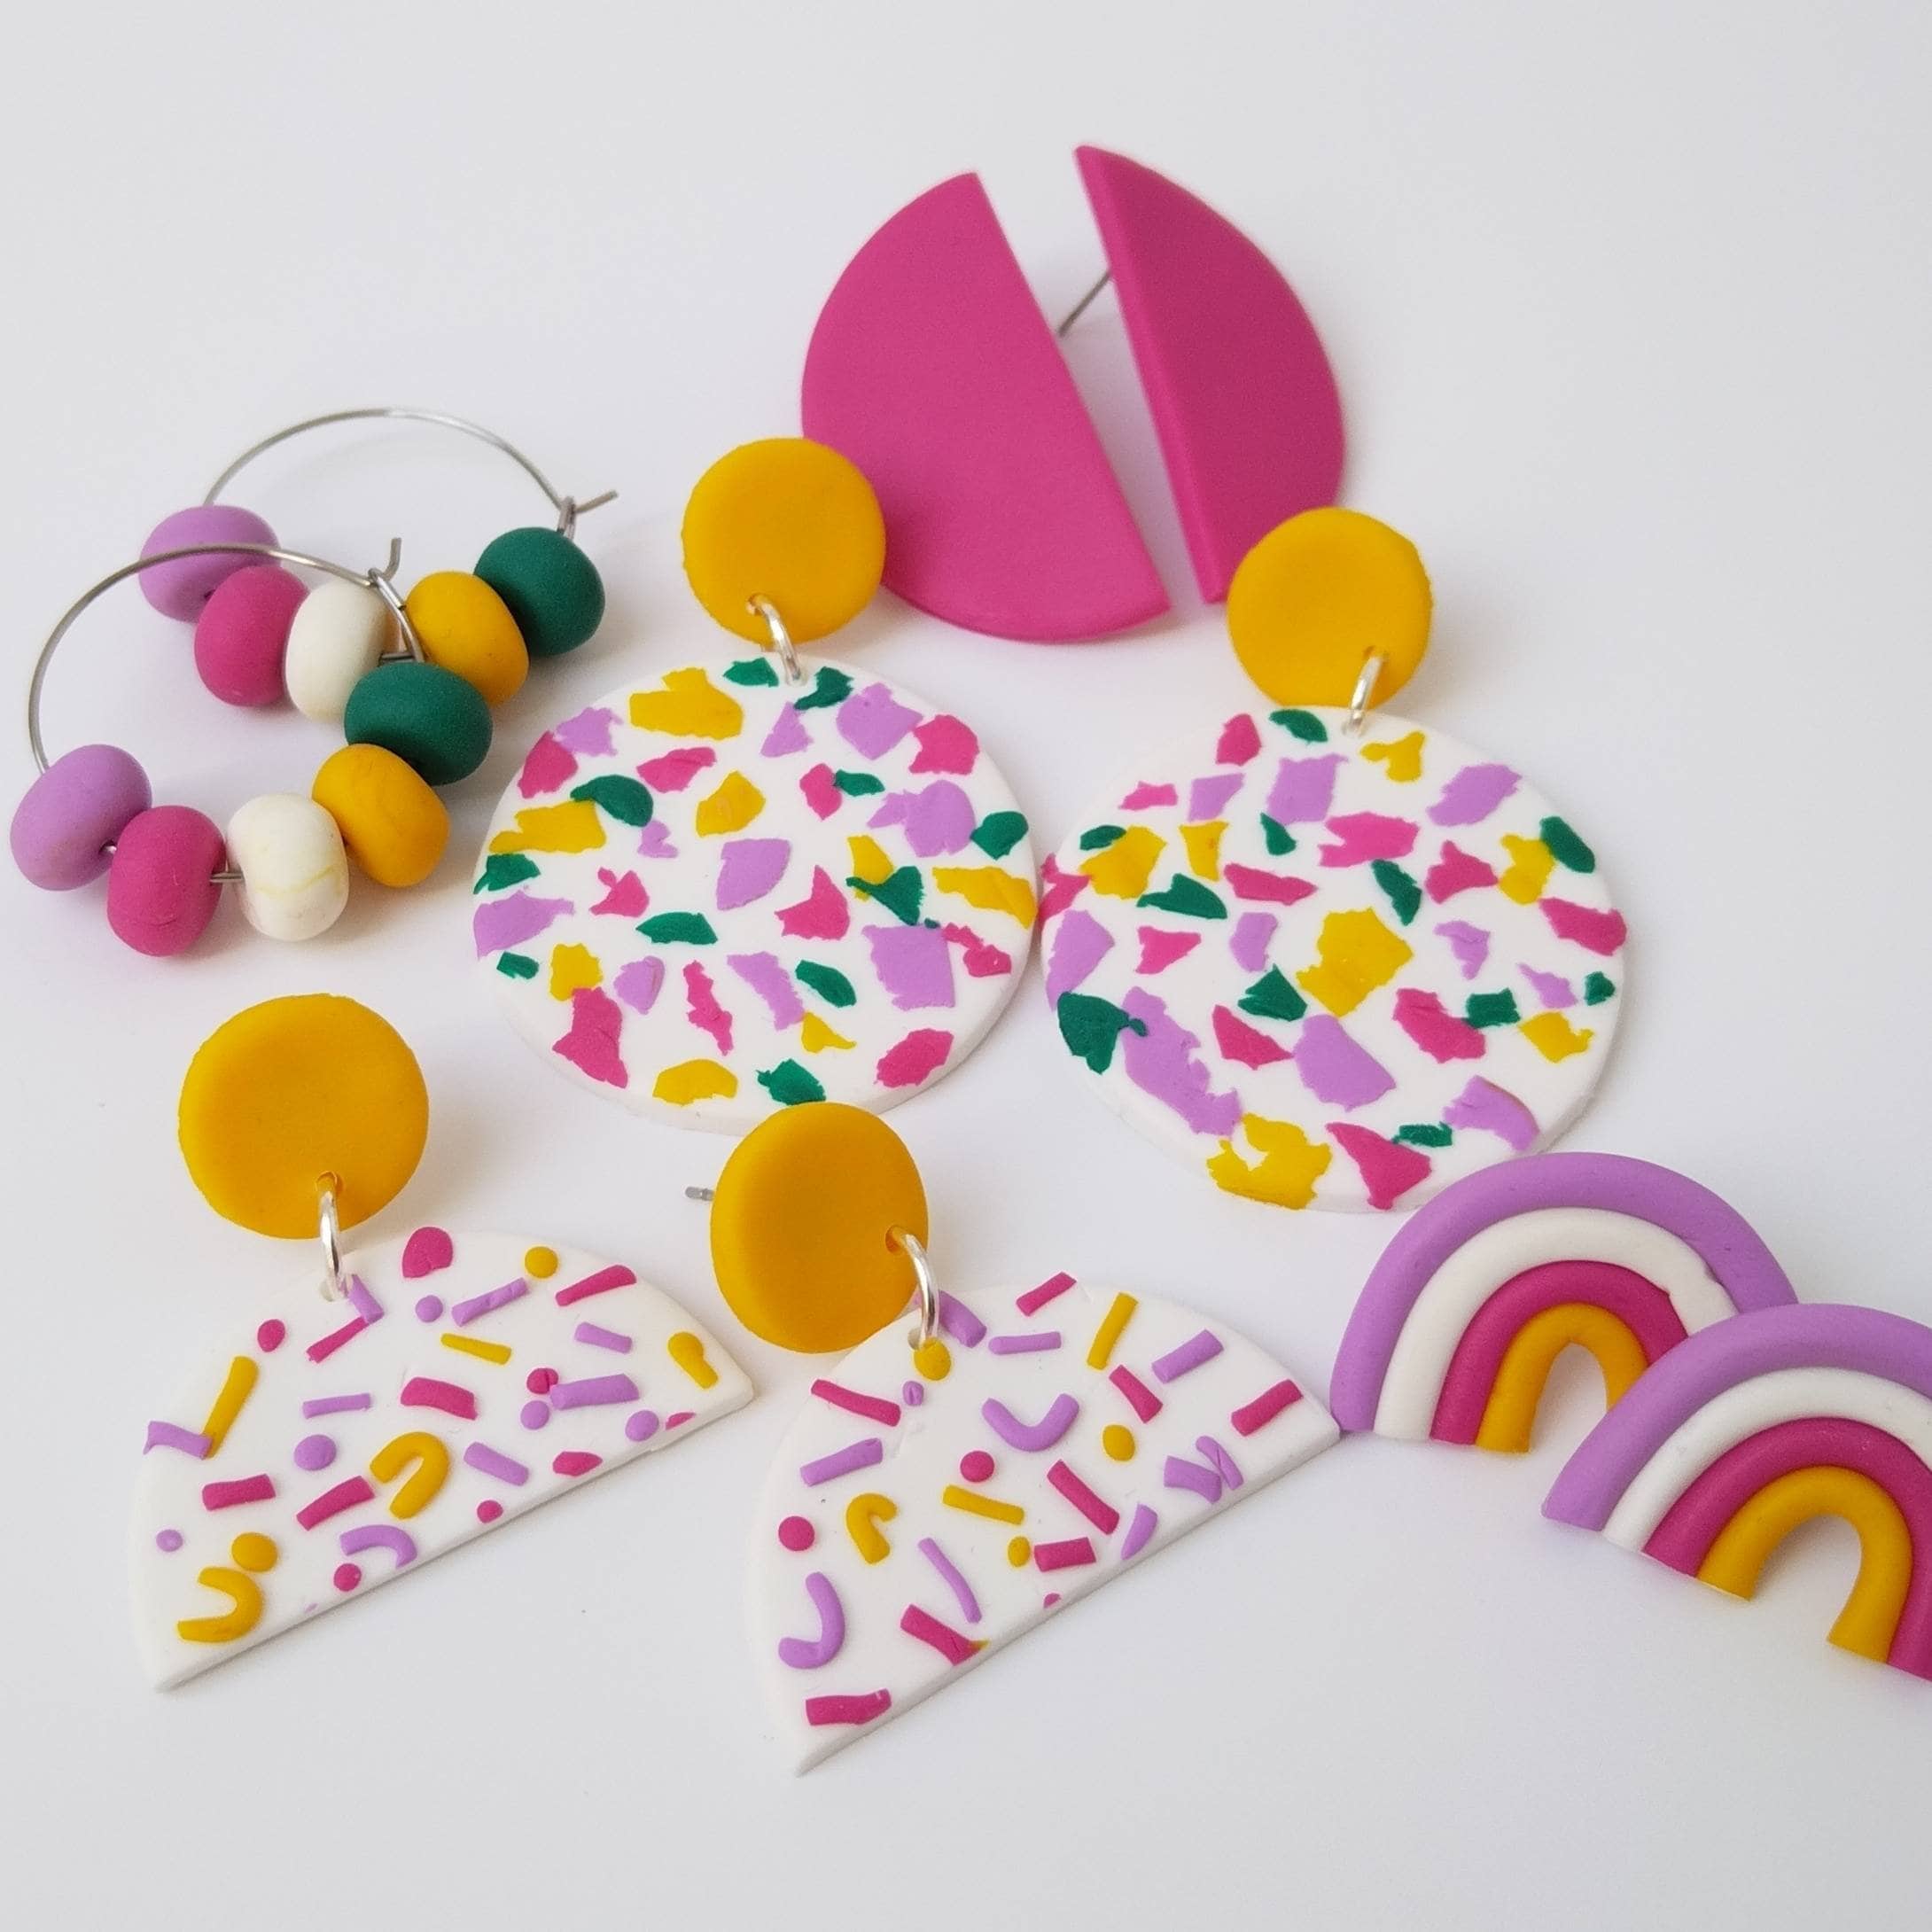 Craftmaker Create Your Own Polymer Clay Jewelry Kit|Other Format